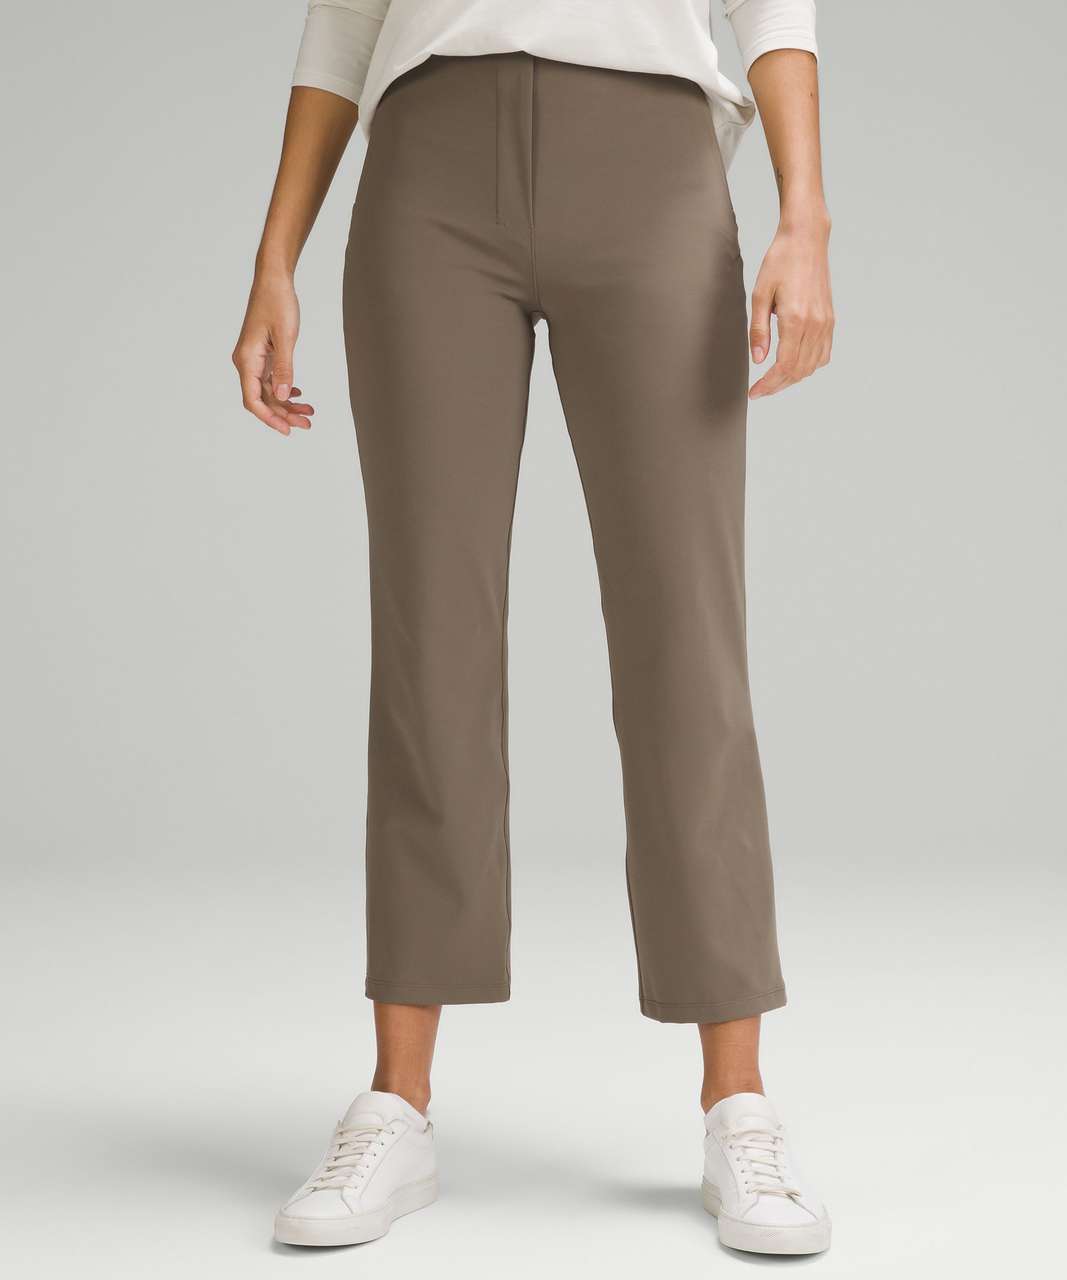 Lululemon Smooth Fit Pull-On High-Rise Cropped Pants - Nomad